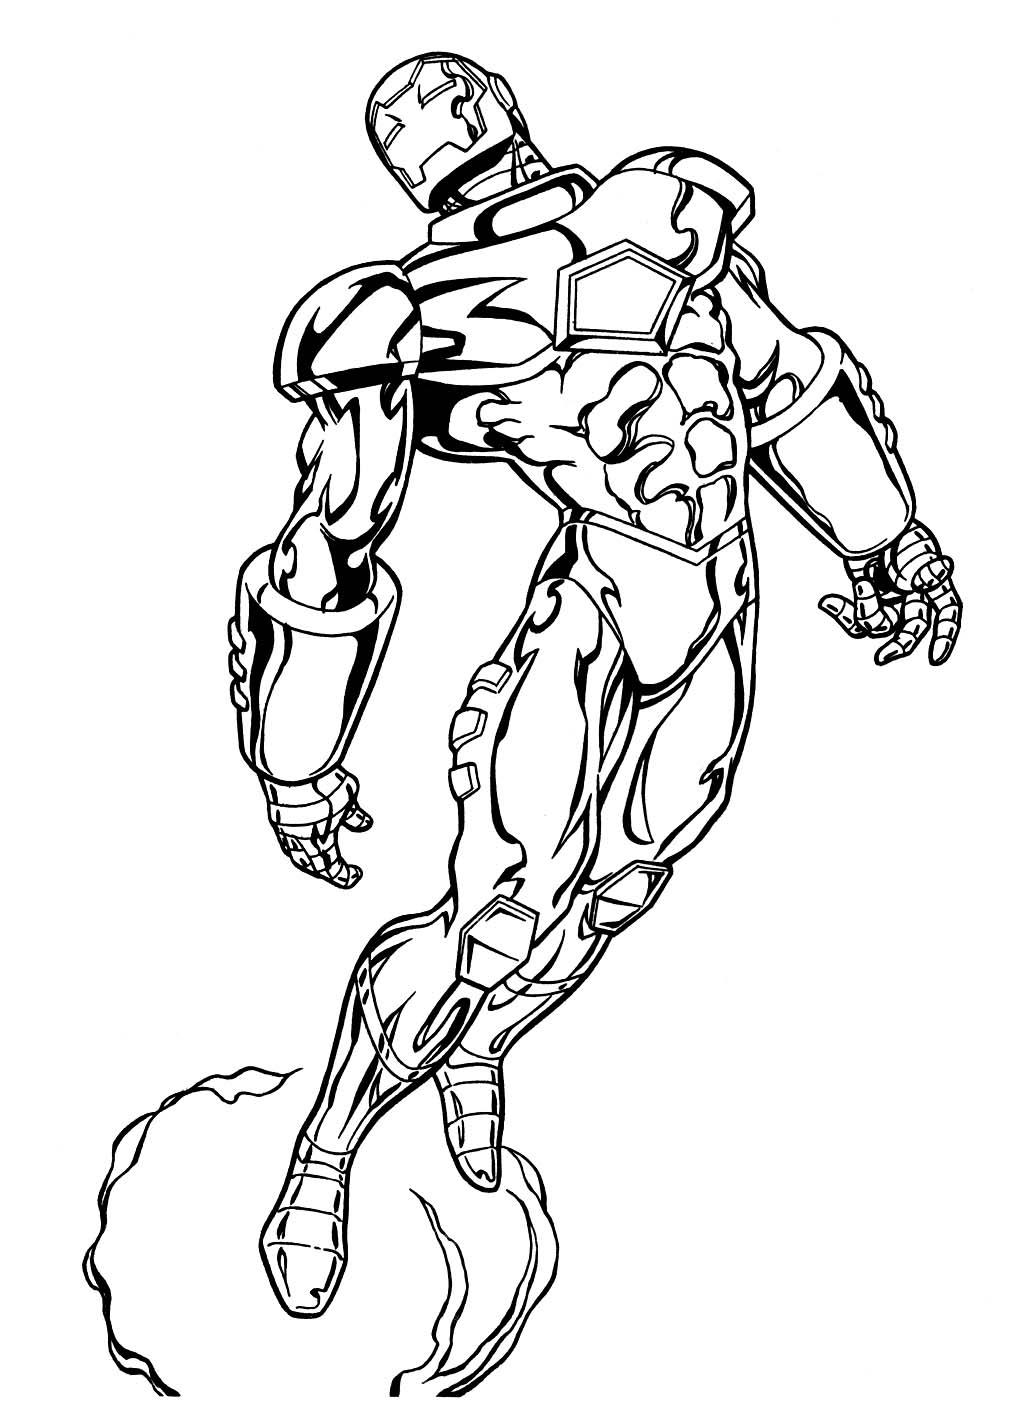 392 Animal Free Printable Marvel Superhero Coloring Pages with Animal character